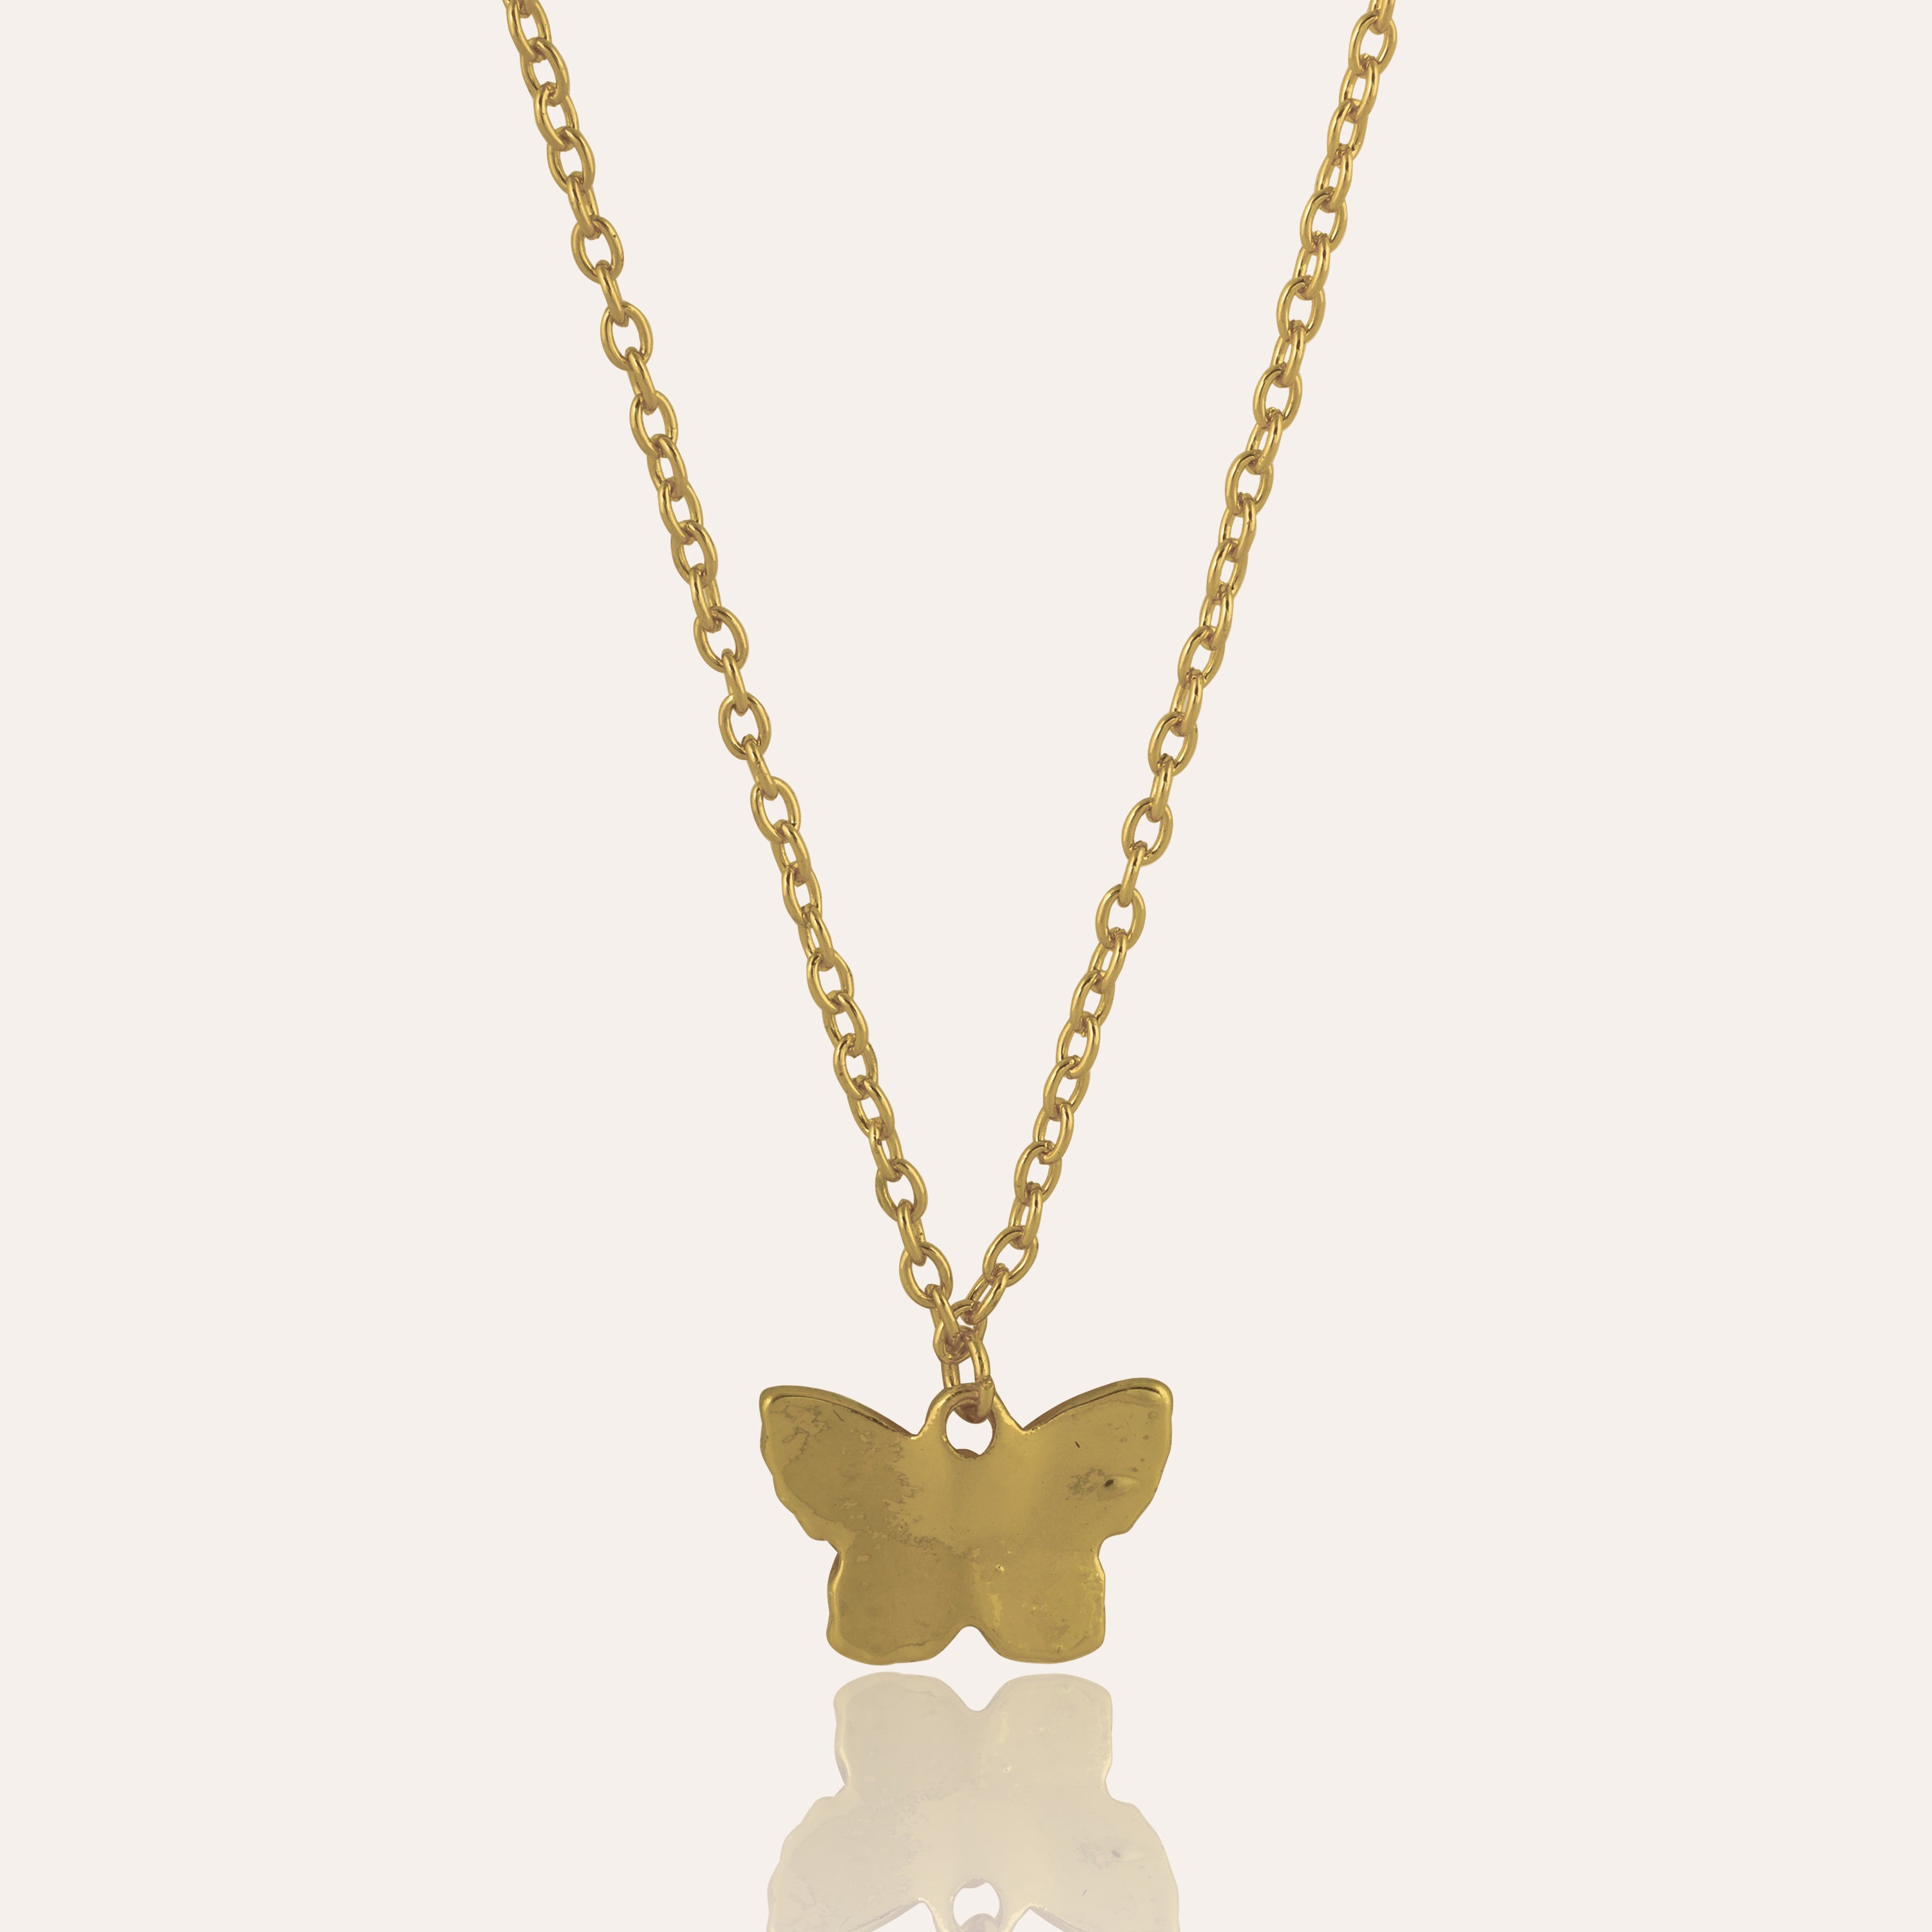 TFC Cute Butterfly Gold Plated Pendant Necklace-Enhance your elegance with our collection of gold-plated necklaces for women. Choose from stunning pendant necklaces, chic choker necklaces, and trendy layered necklaces. Our sleek and dainty designs are both affordable and anti-tarnish, ensuring lasting beauty. Enjoy the cheapest fashion jewellery, lightweight and stylish- only at The Fun Company